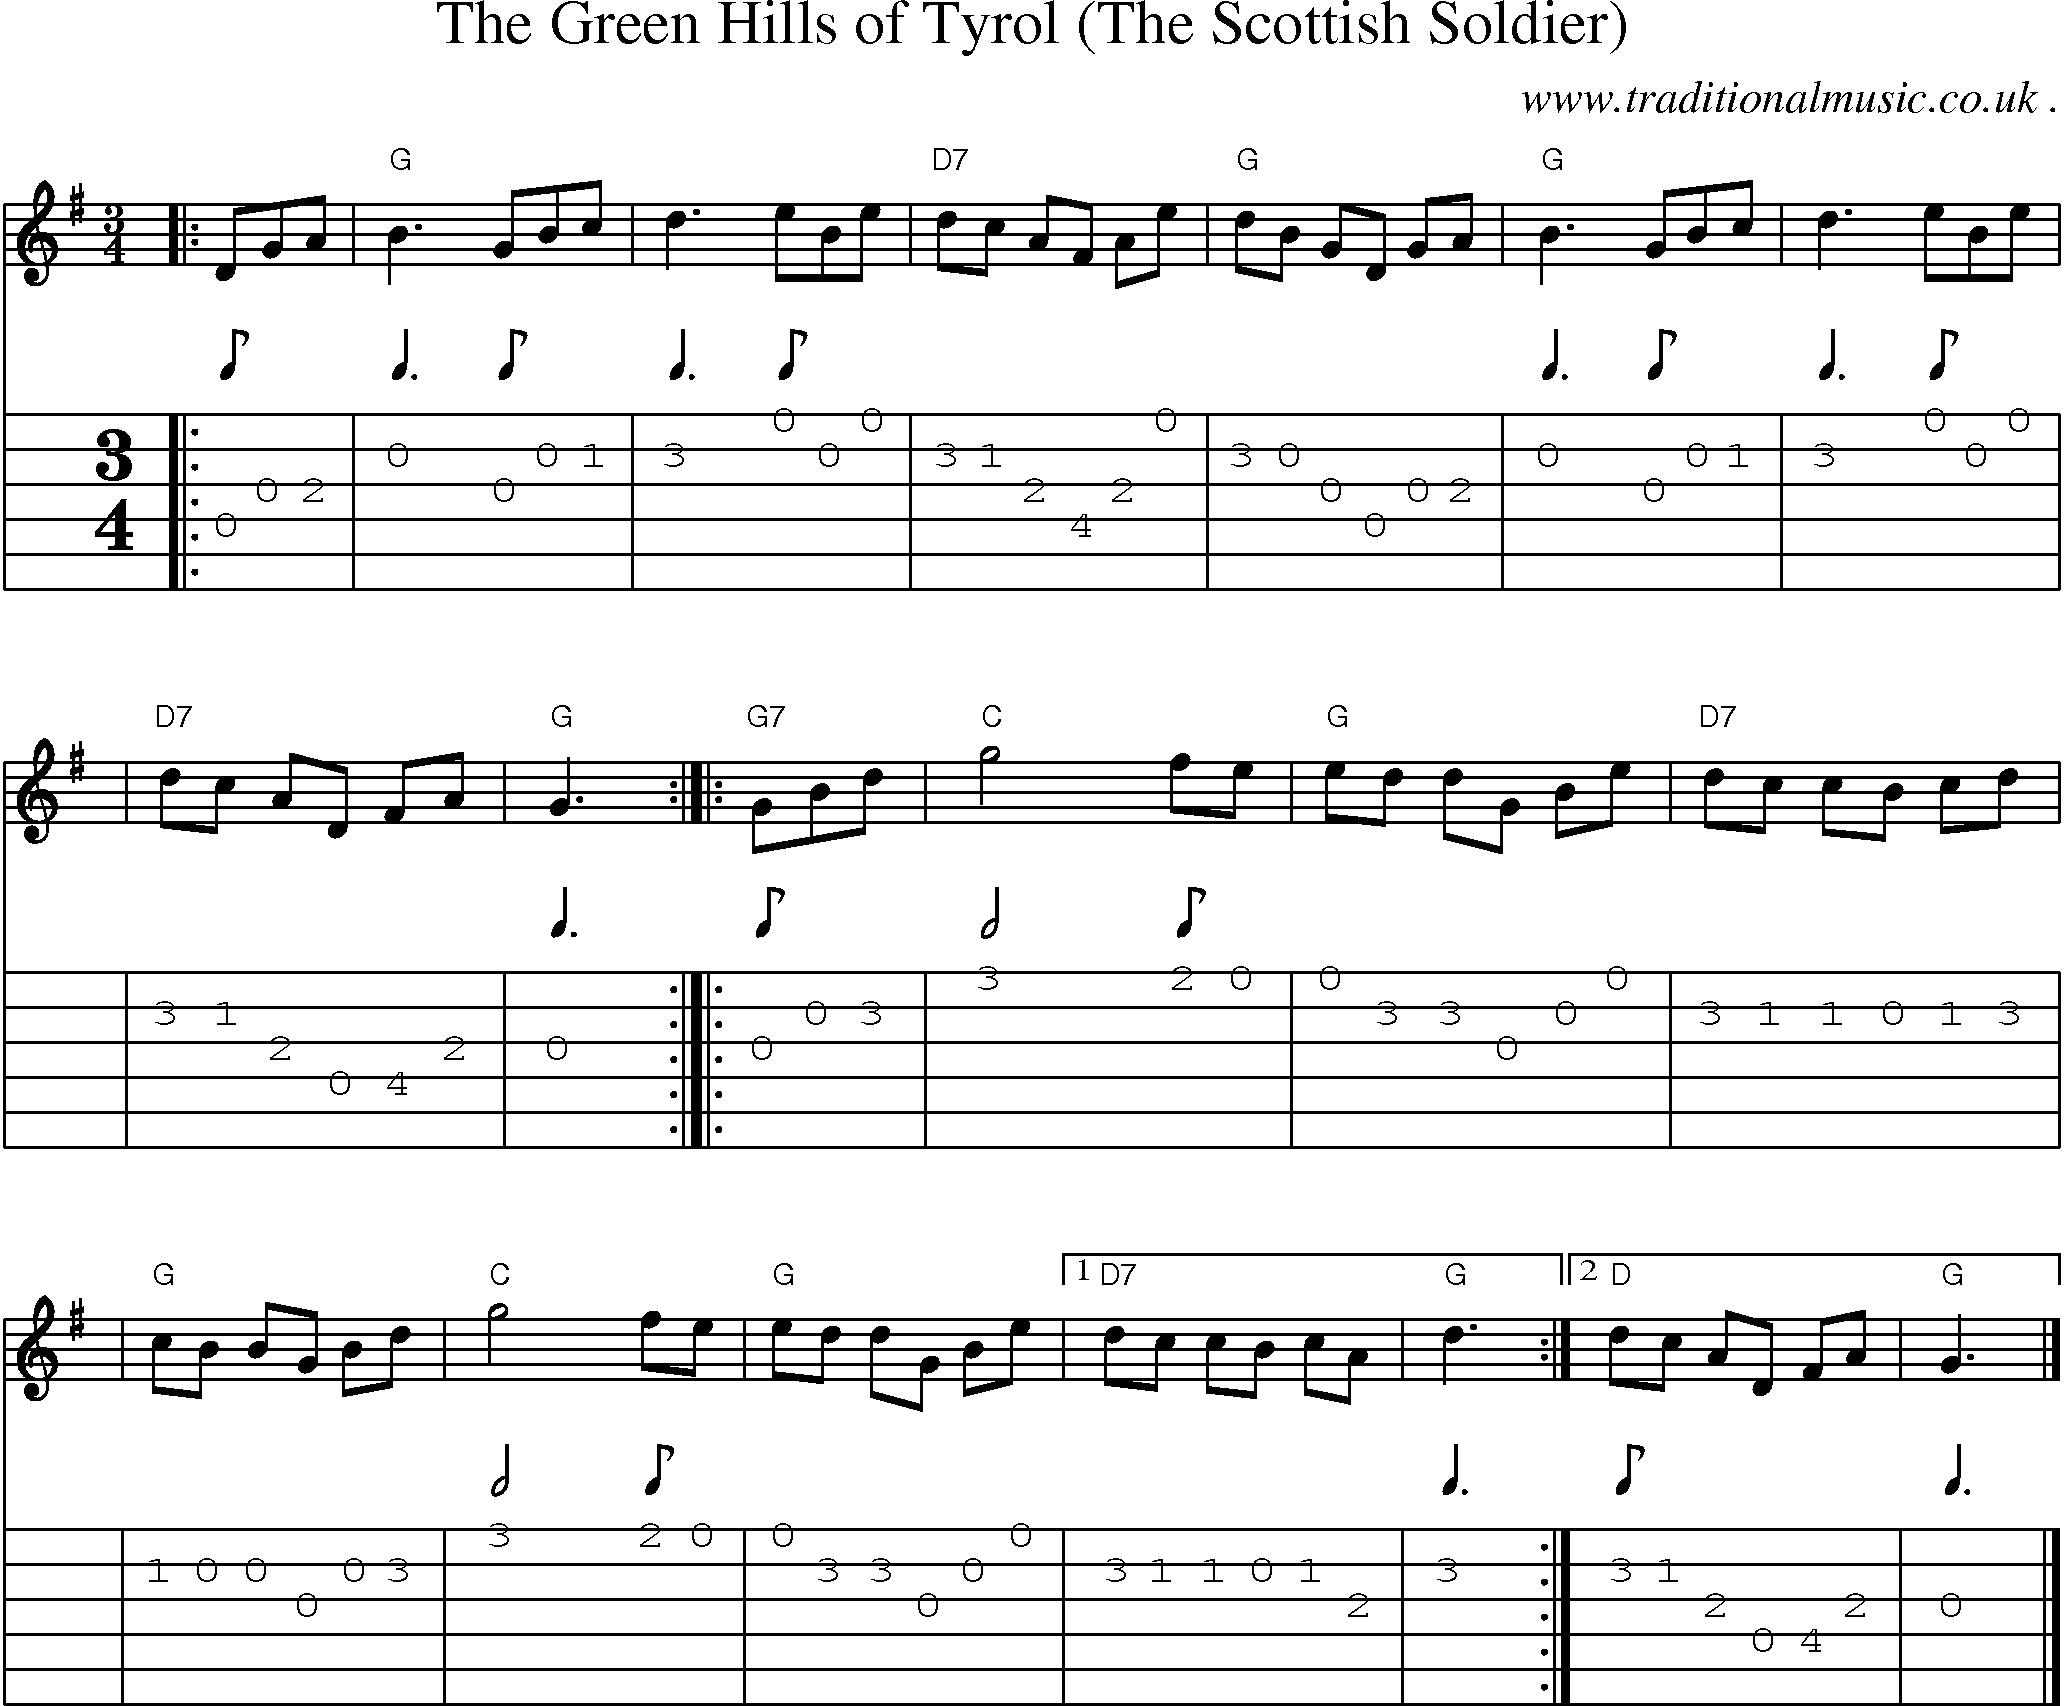 Sheet-music  score, Chords and Guitar Tabs for The Green Hills Of Tyrol The Scottish Soldier